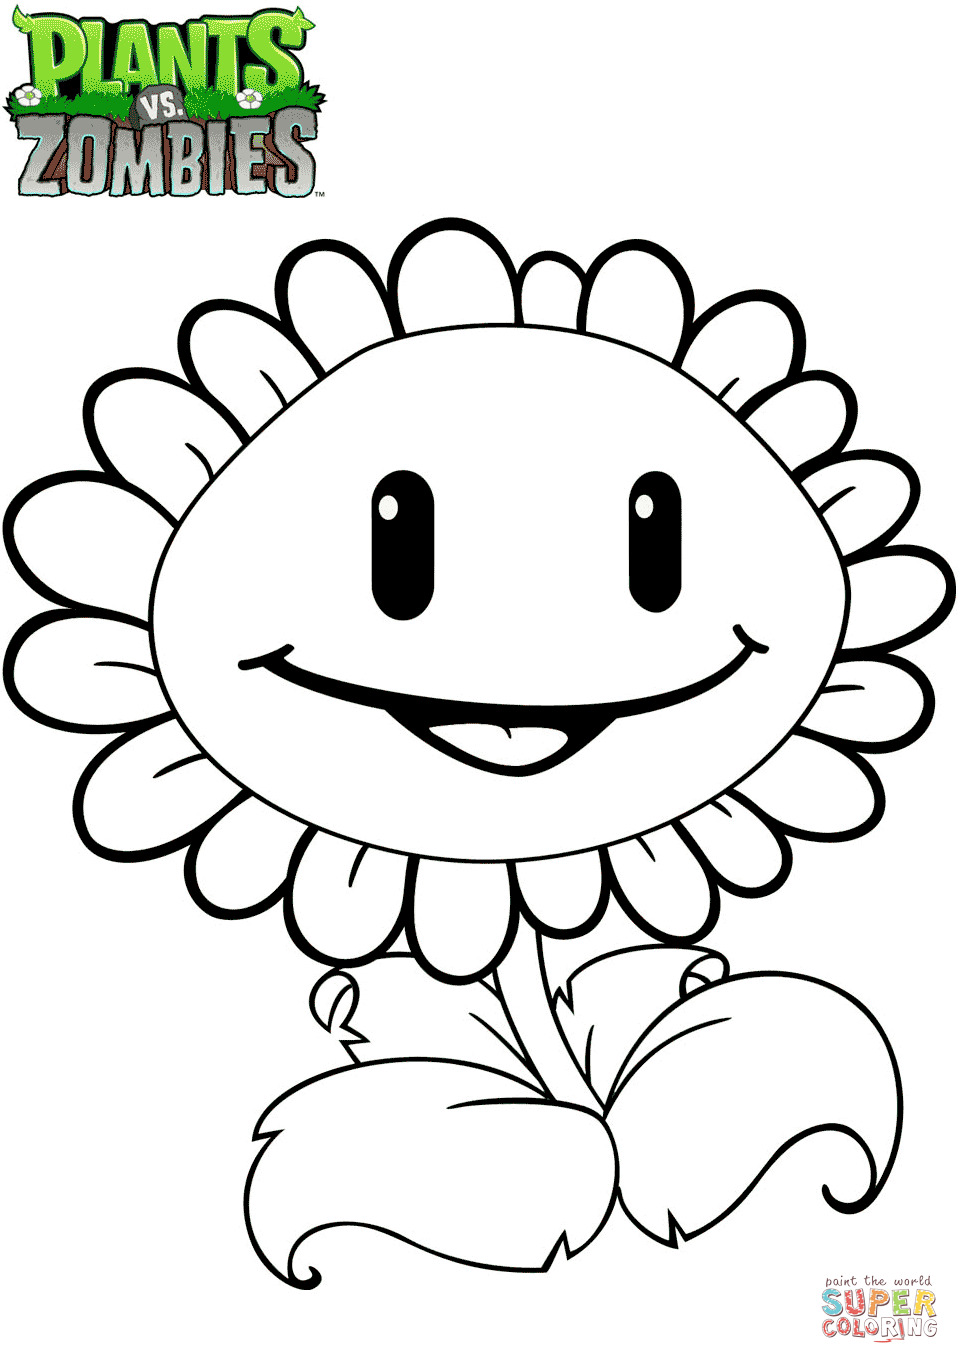 Plants vs zombies sunflower coloring page free printable coloring pages